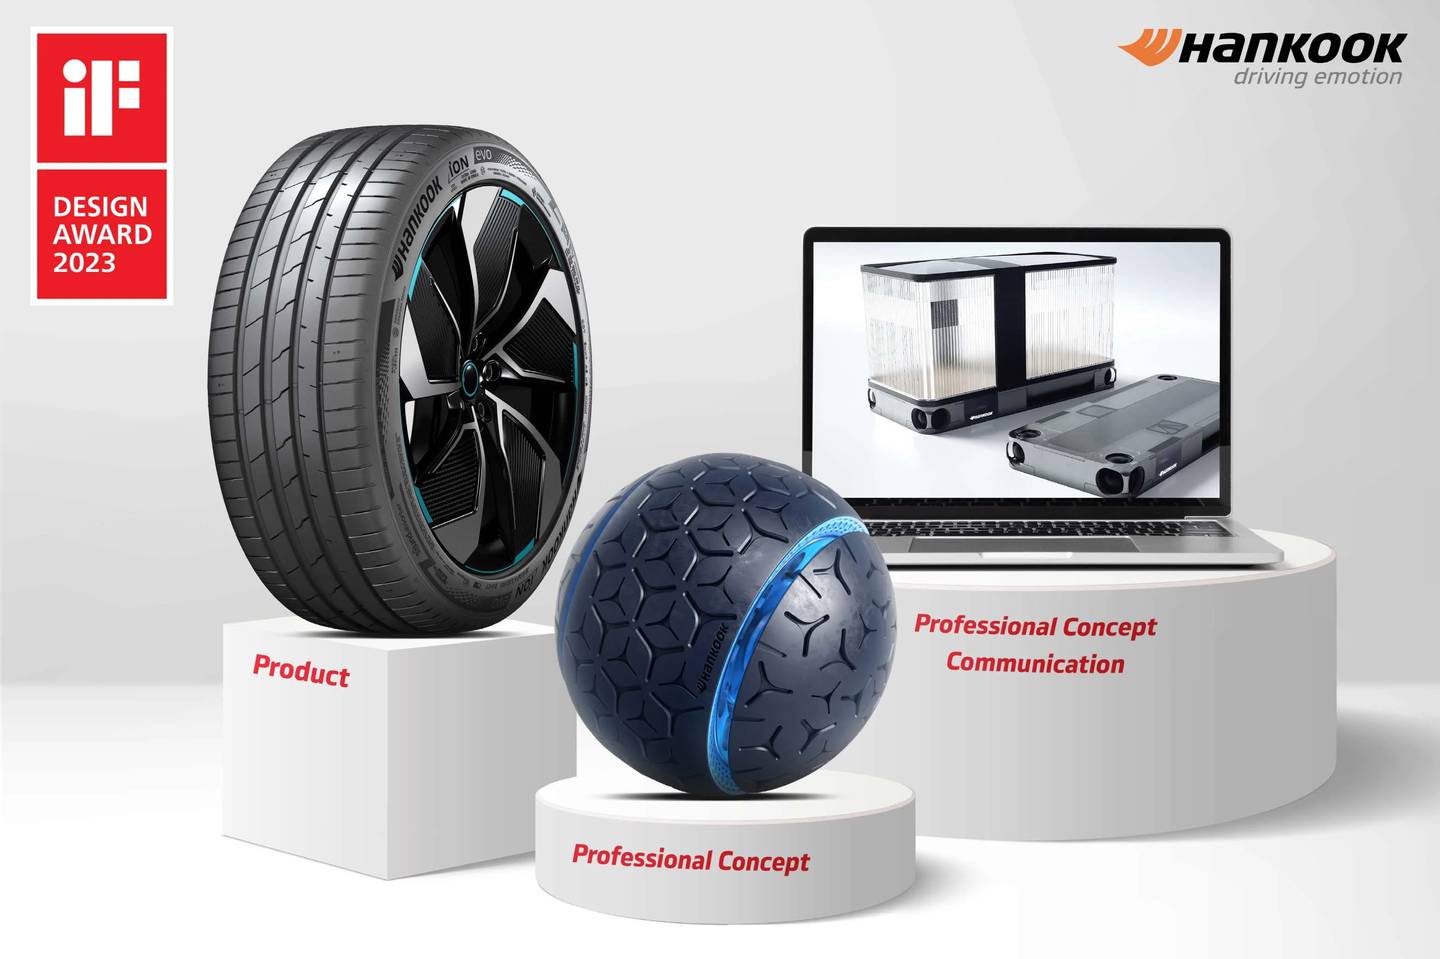 Hankook Tire technology and design excellence recognized at iF Design Award 2023